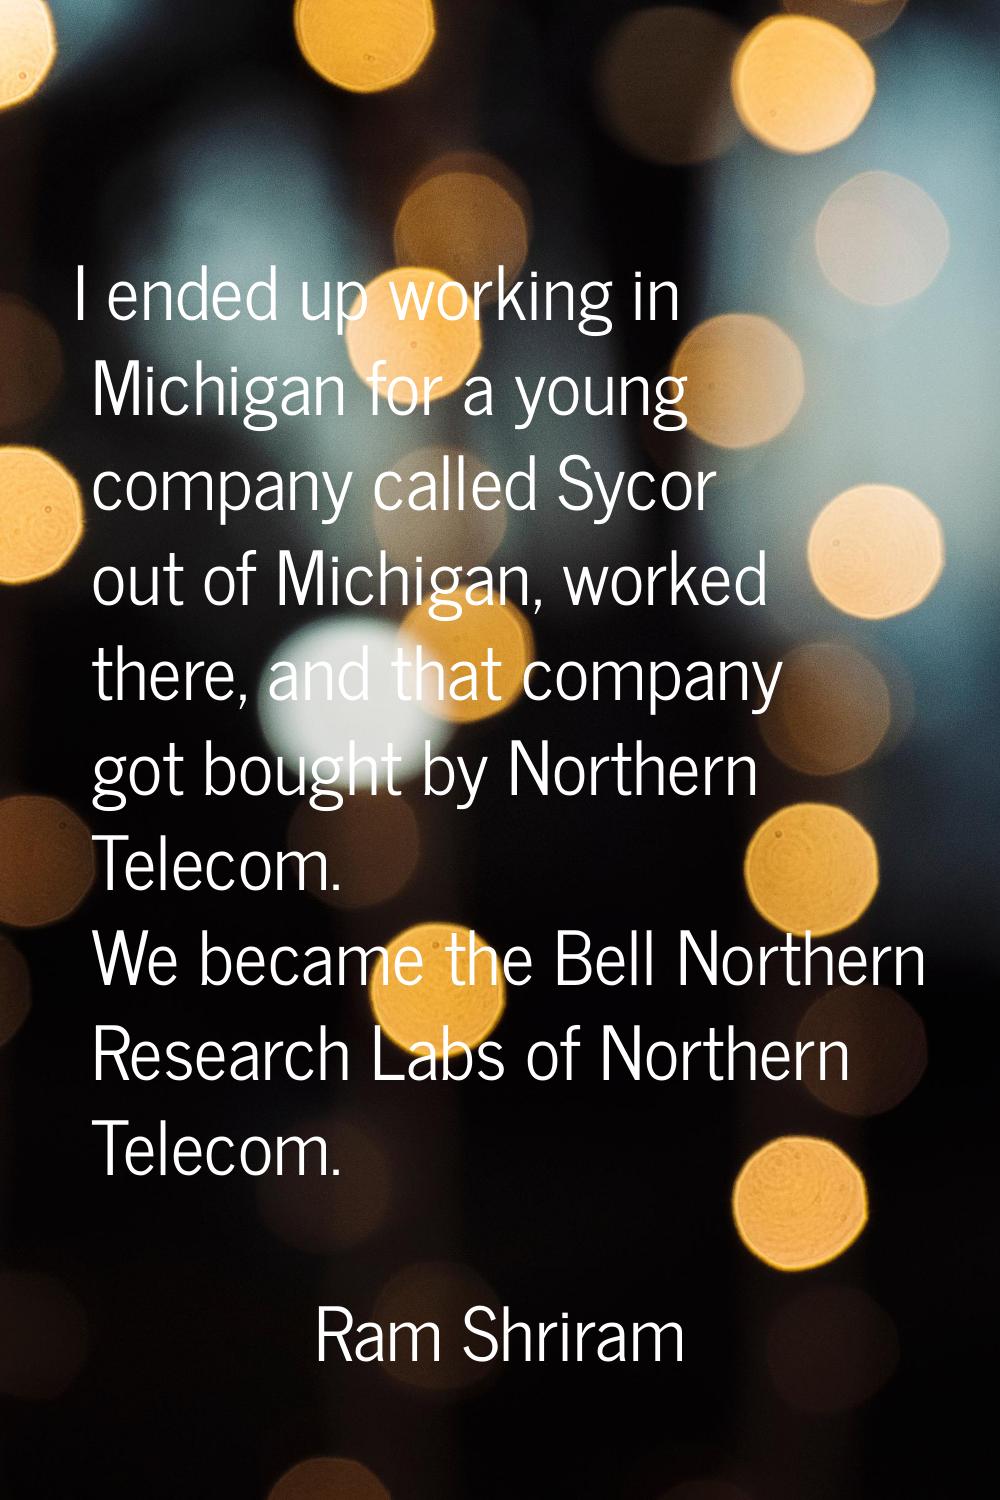 I ended up working in Michigan for a young company called Sycor out of Michigan, worked there, and 